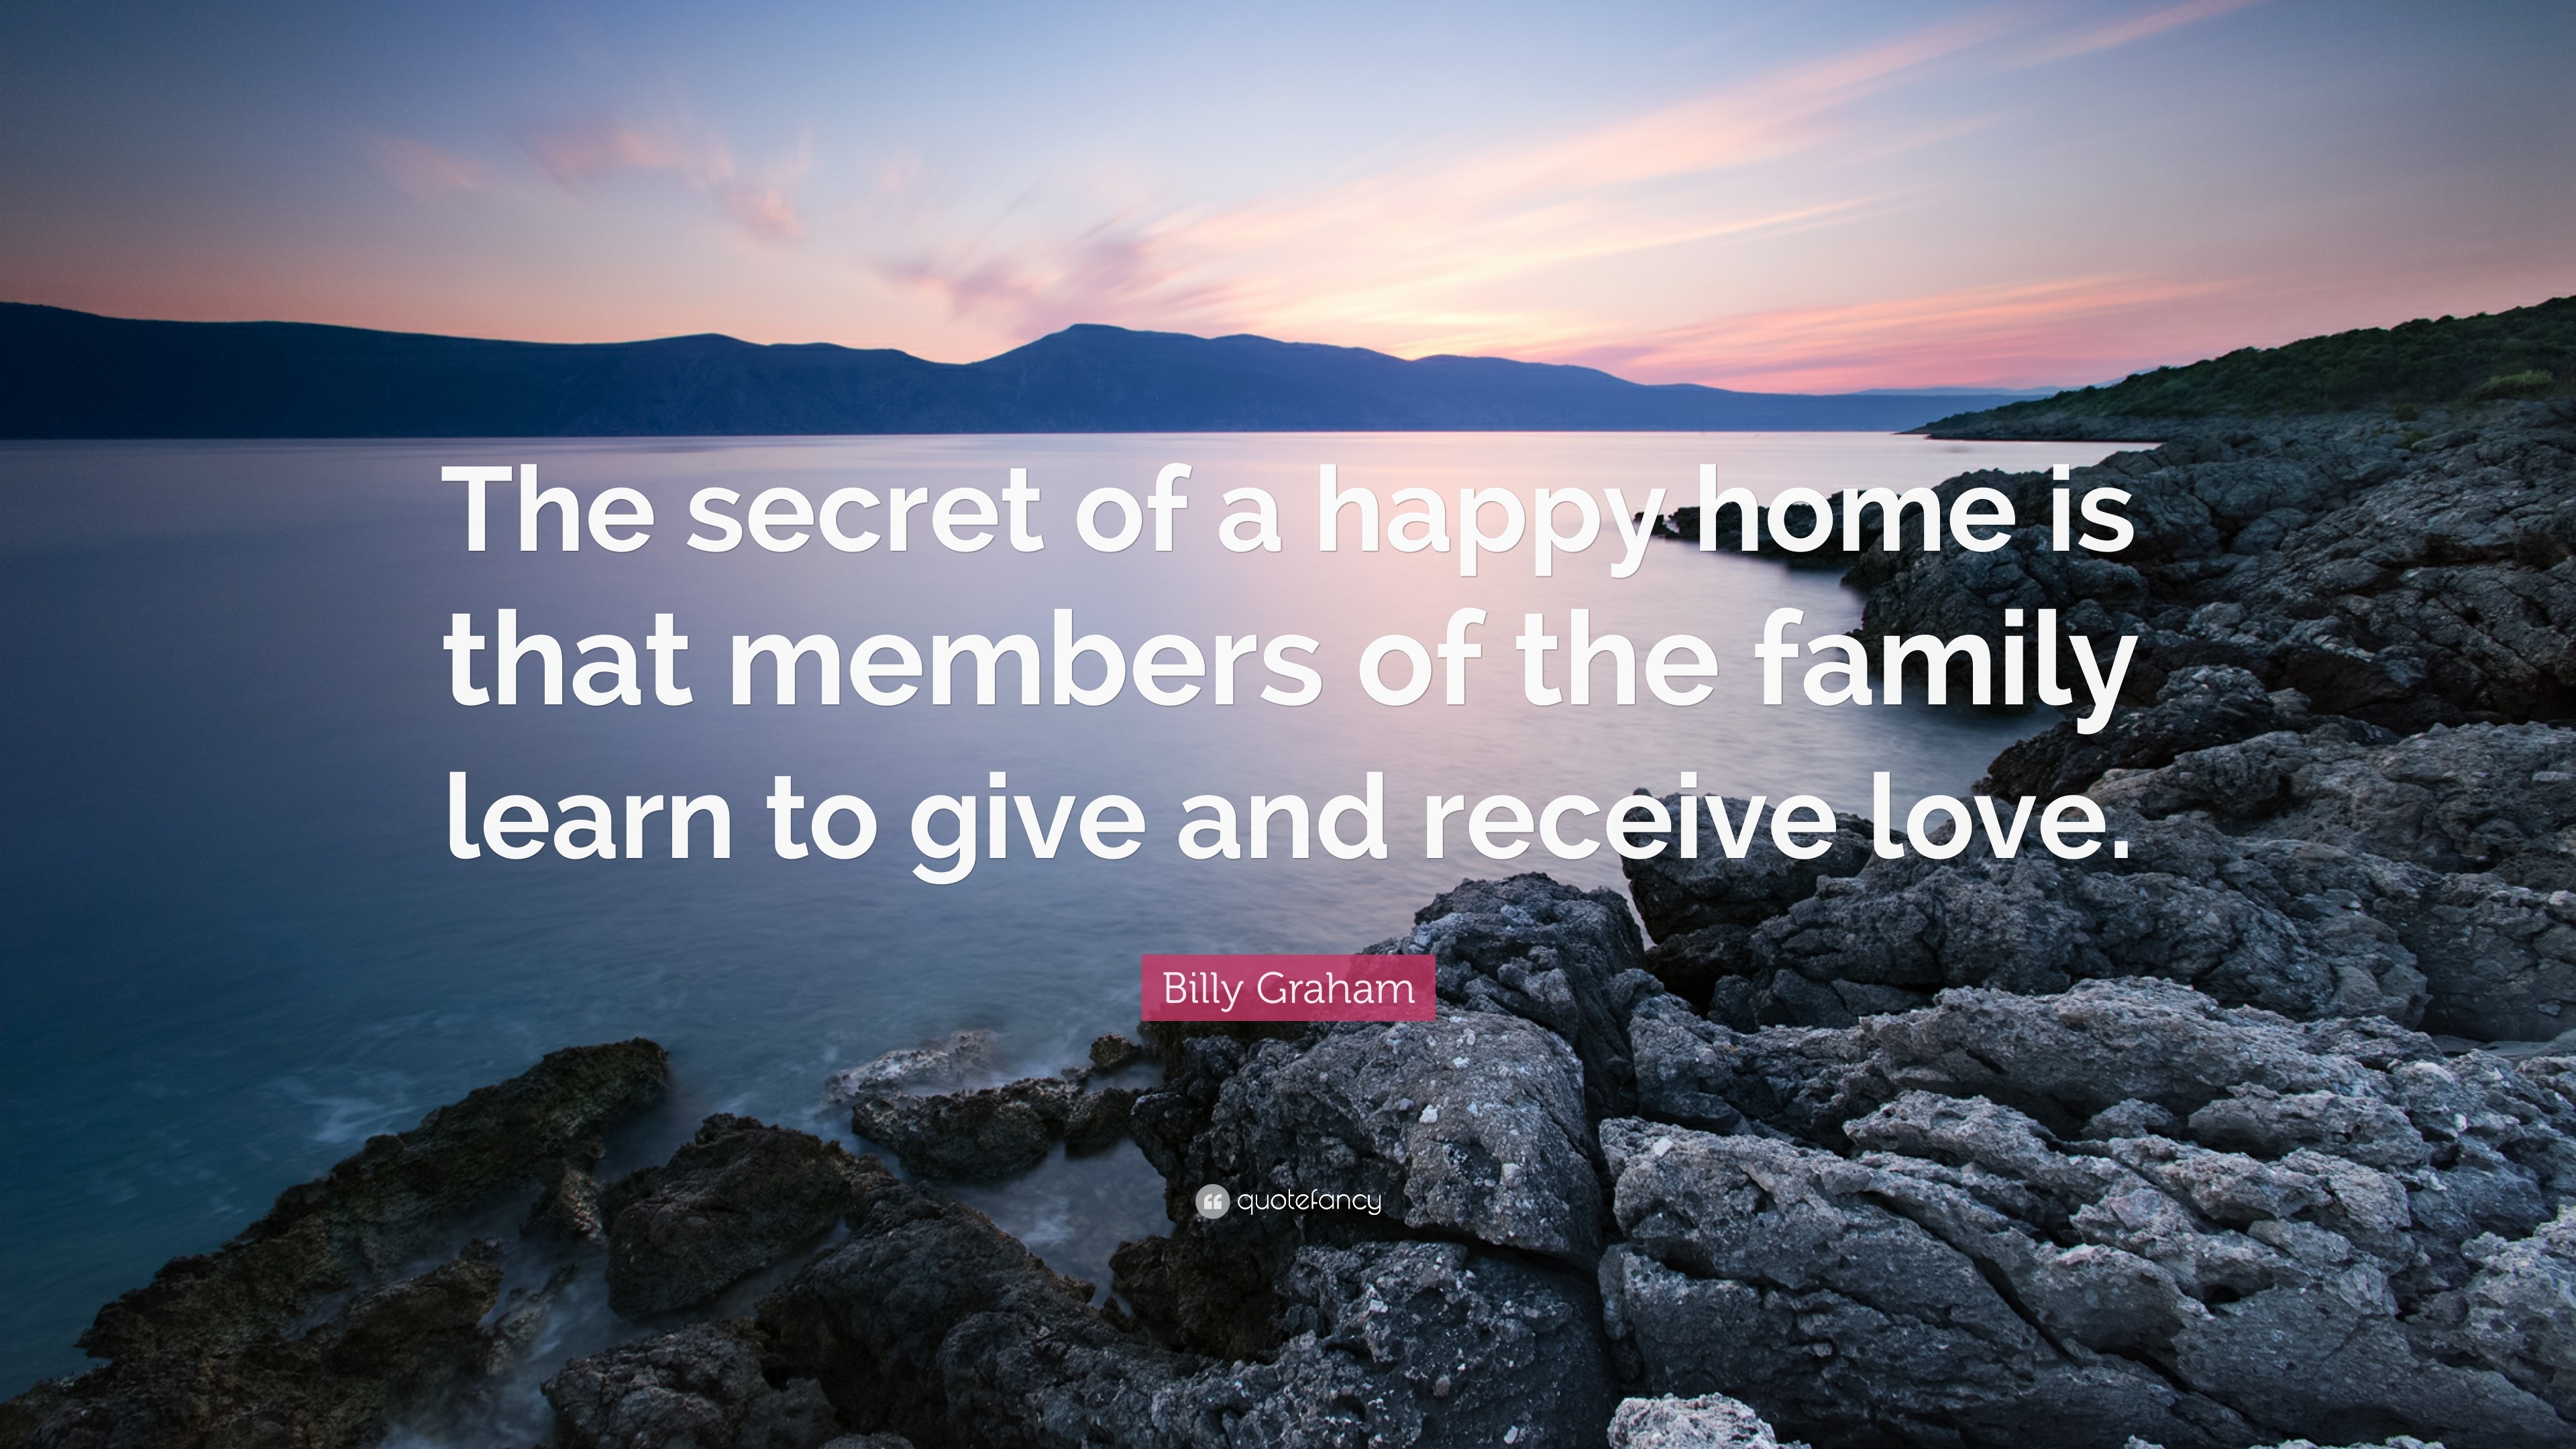 https://quotefancy.com/media/wallpaper/3840x2160/391623-Billy-Graham-Quote-The-secret-of-a-happy-home-is-that-members-of.jpg